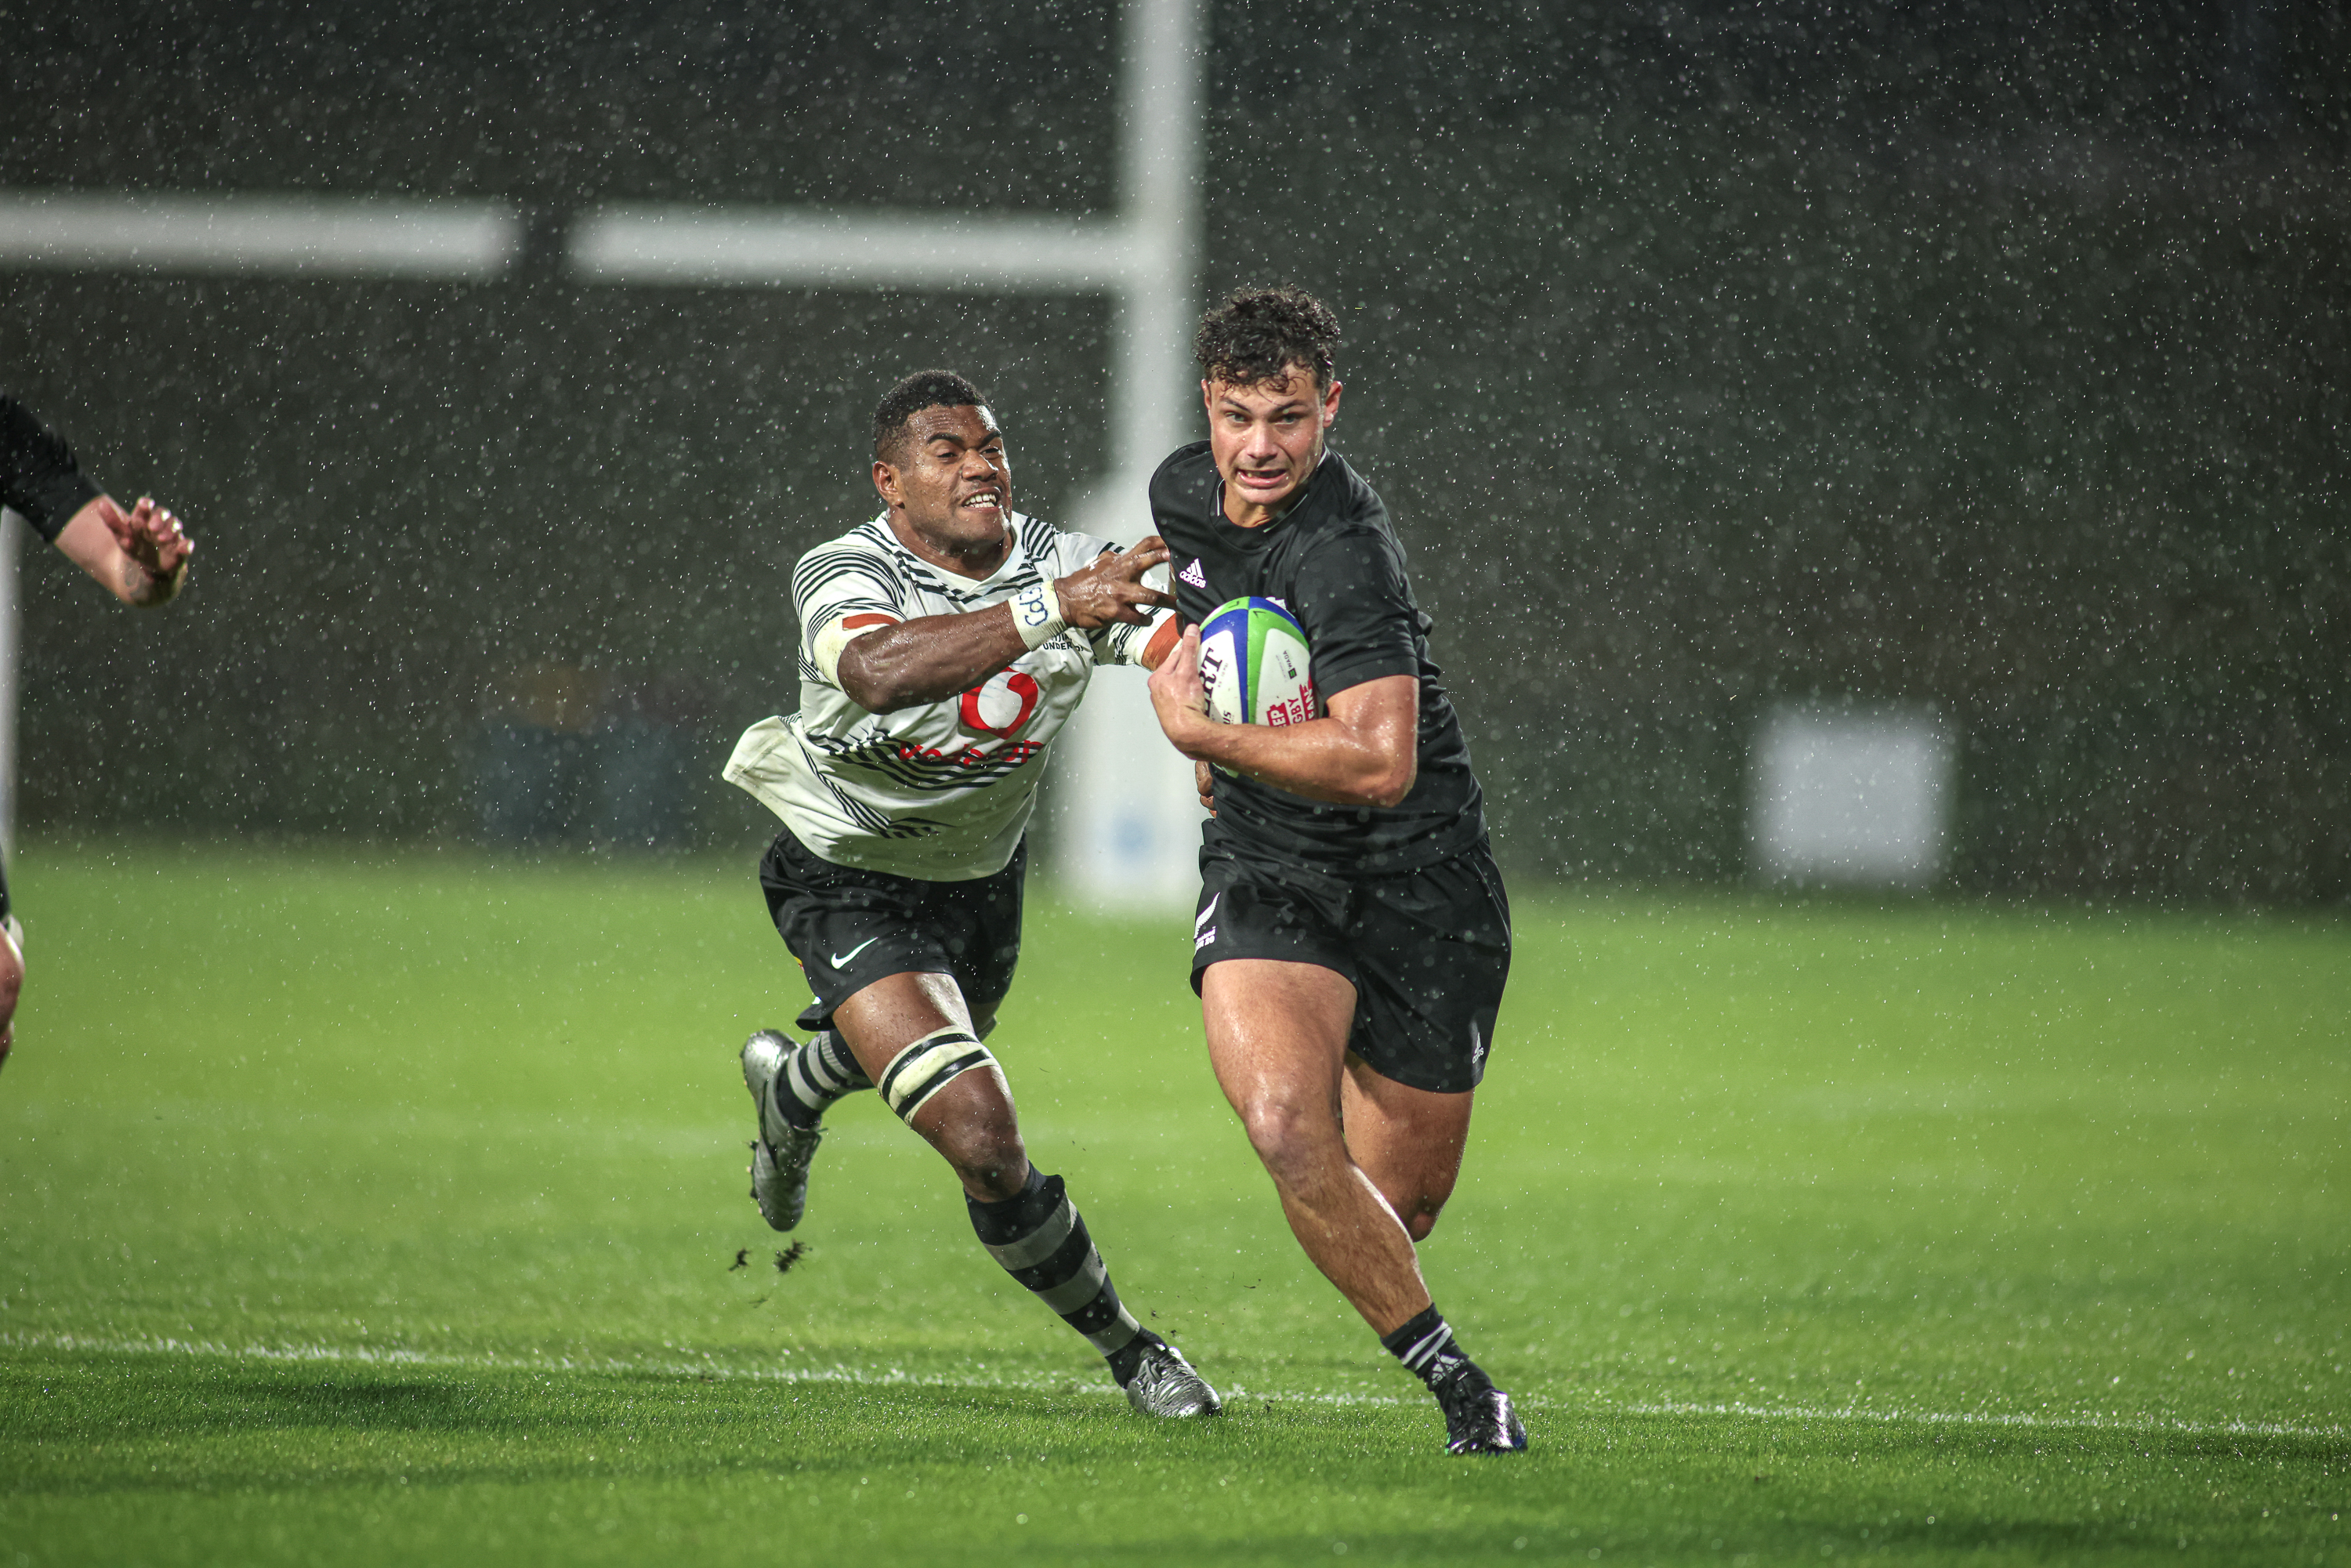 New Zealand Under 20s eye second win in Oceania Championship